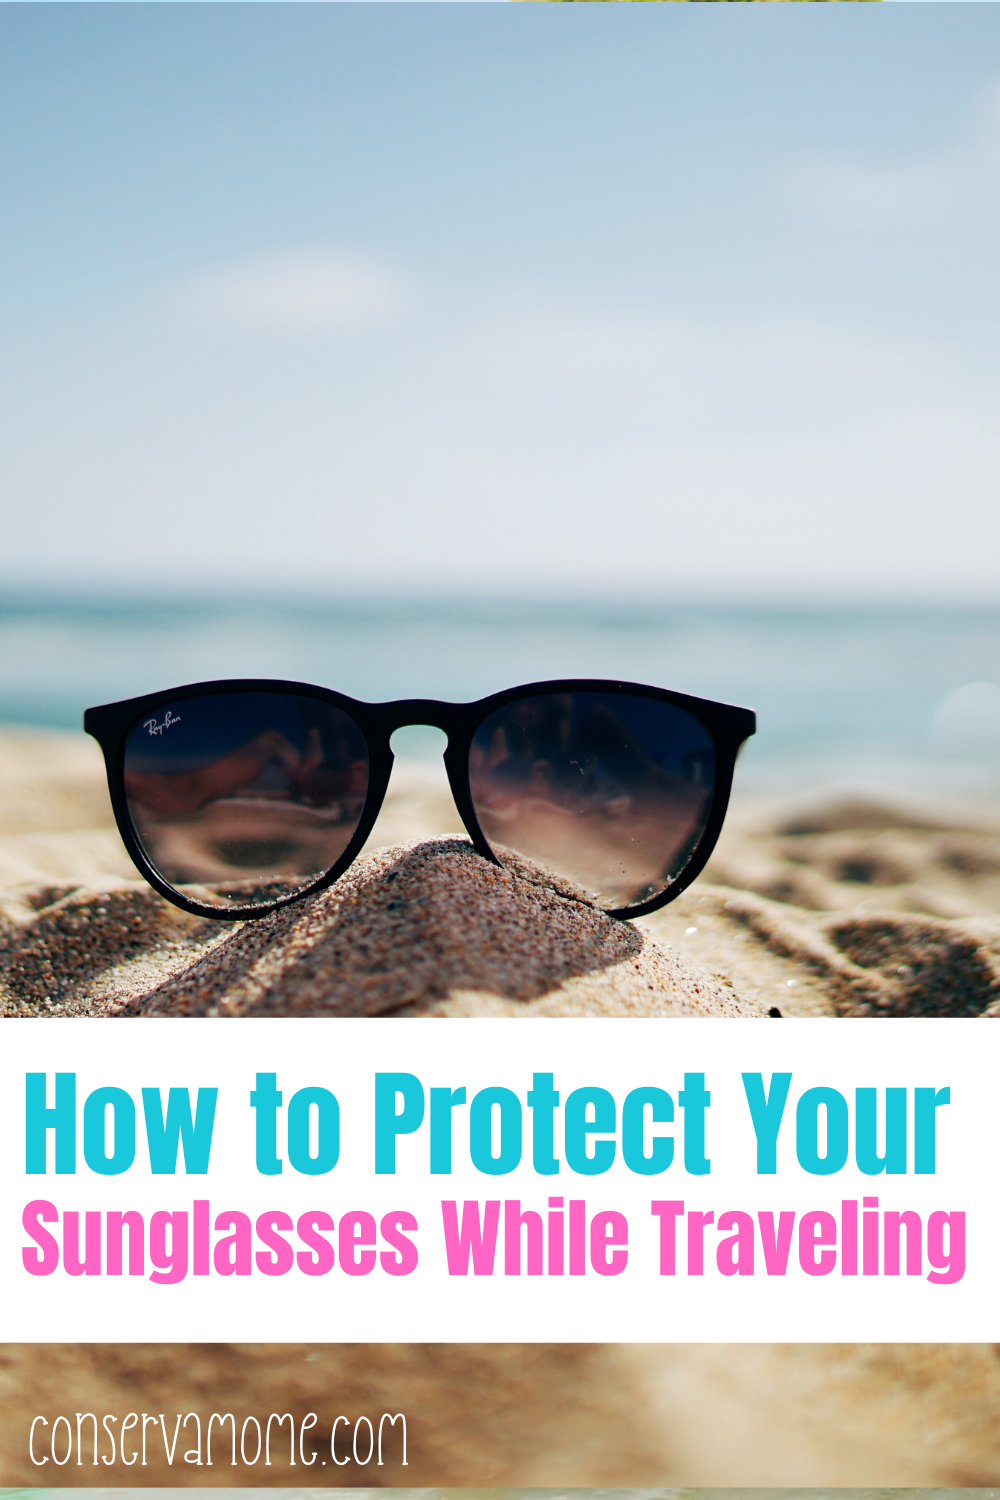 How to protect your sunglasses while traveling